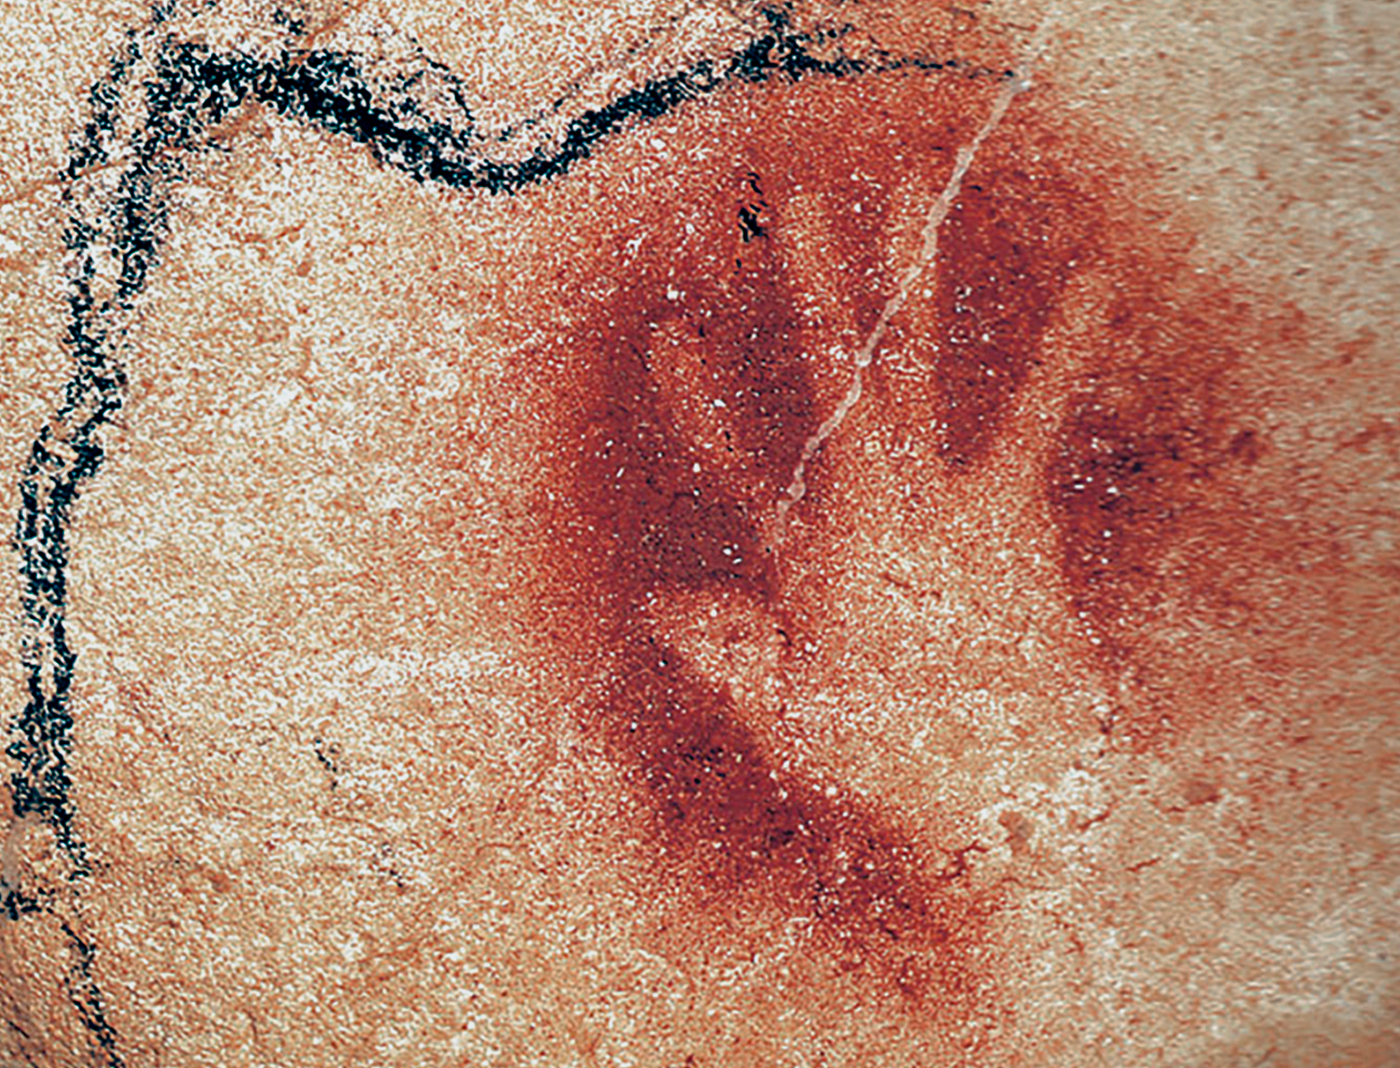 Red hand stencil from the Chauvet Cave